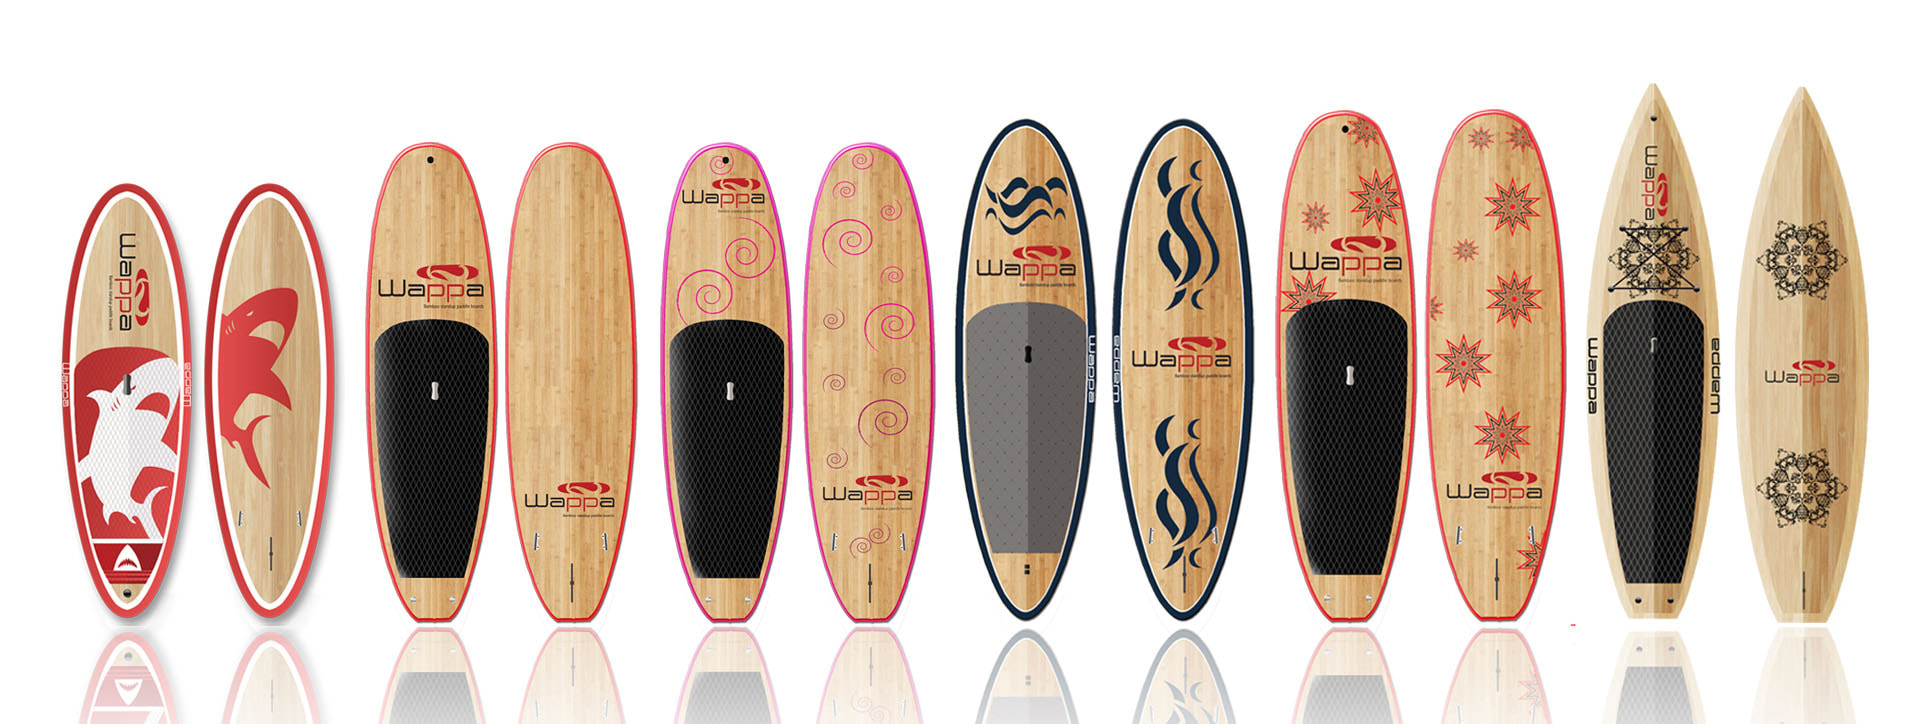 wappa_paddle_boards_line_up_2019